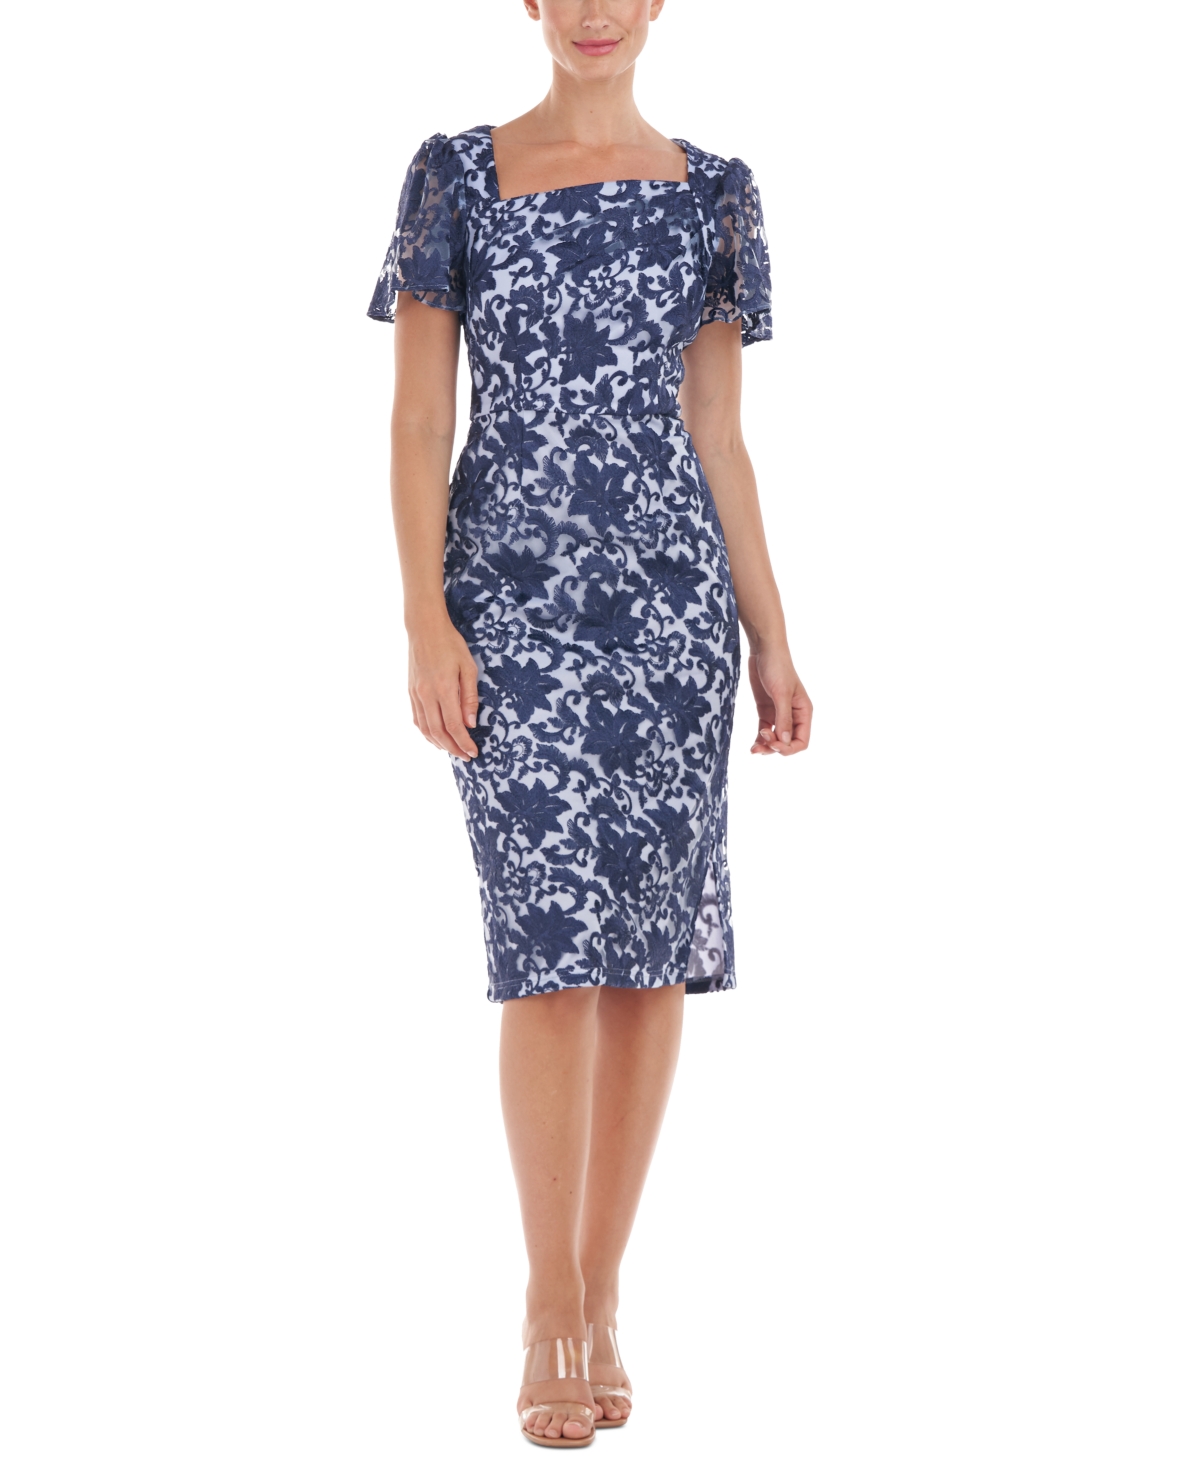 Js Collections Women's Embroidered Cocktail Sheath Dress